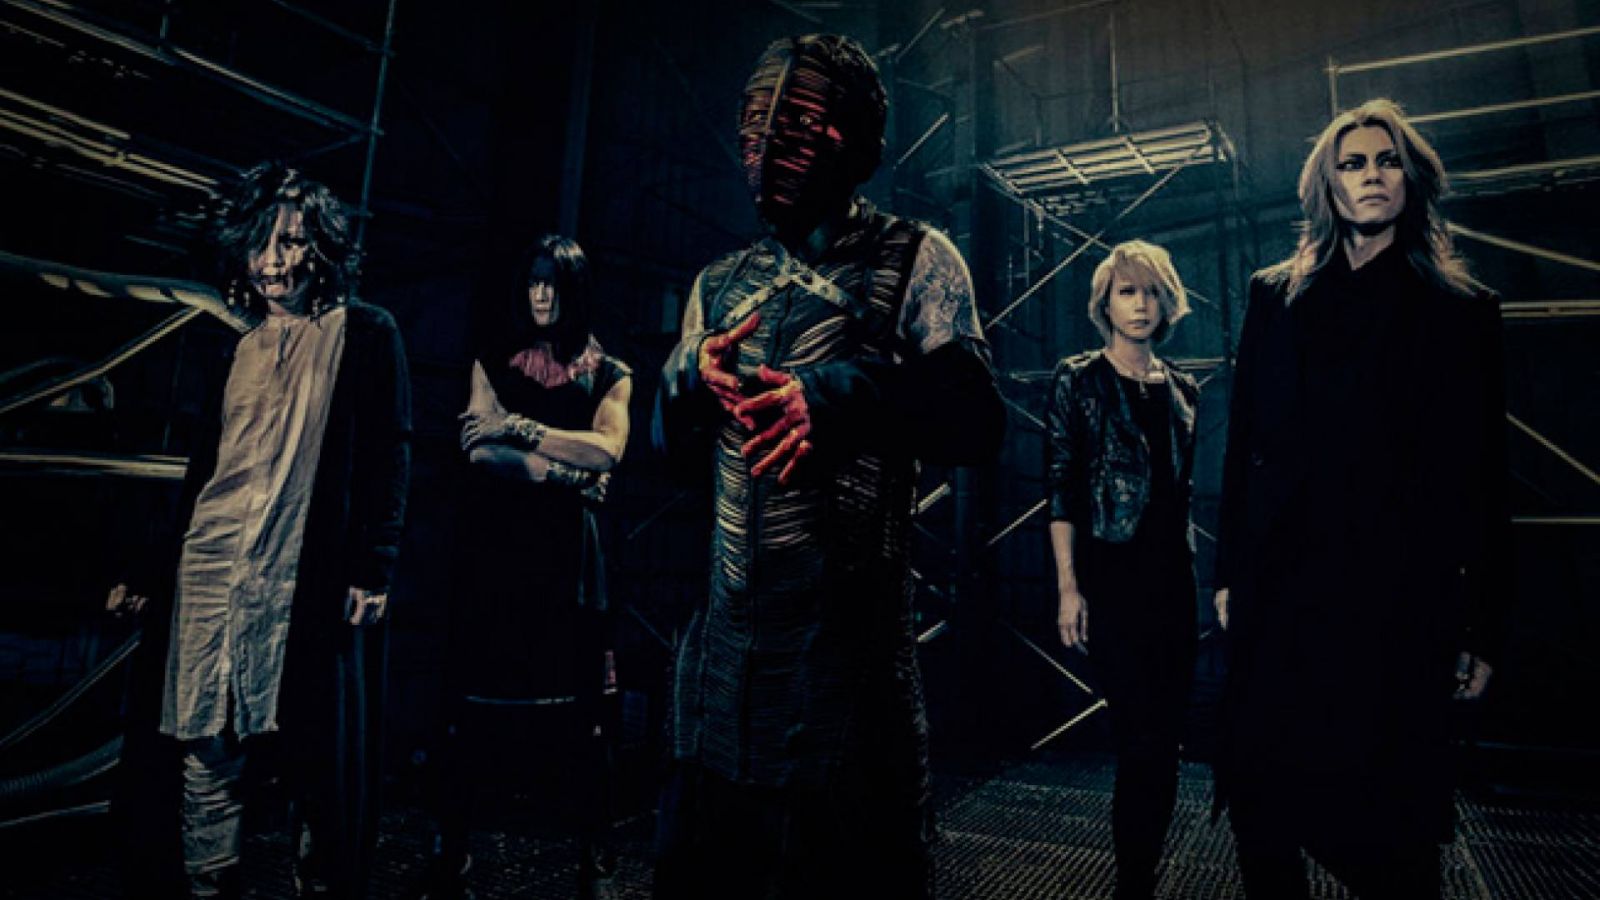 DIR EN GREY - The Insulated World © sun-krad Co., Ltd. All rights reserved.